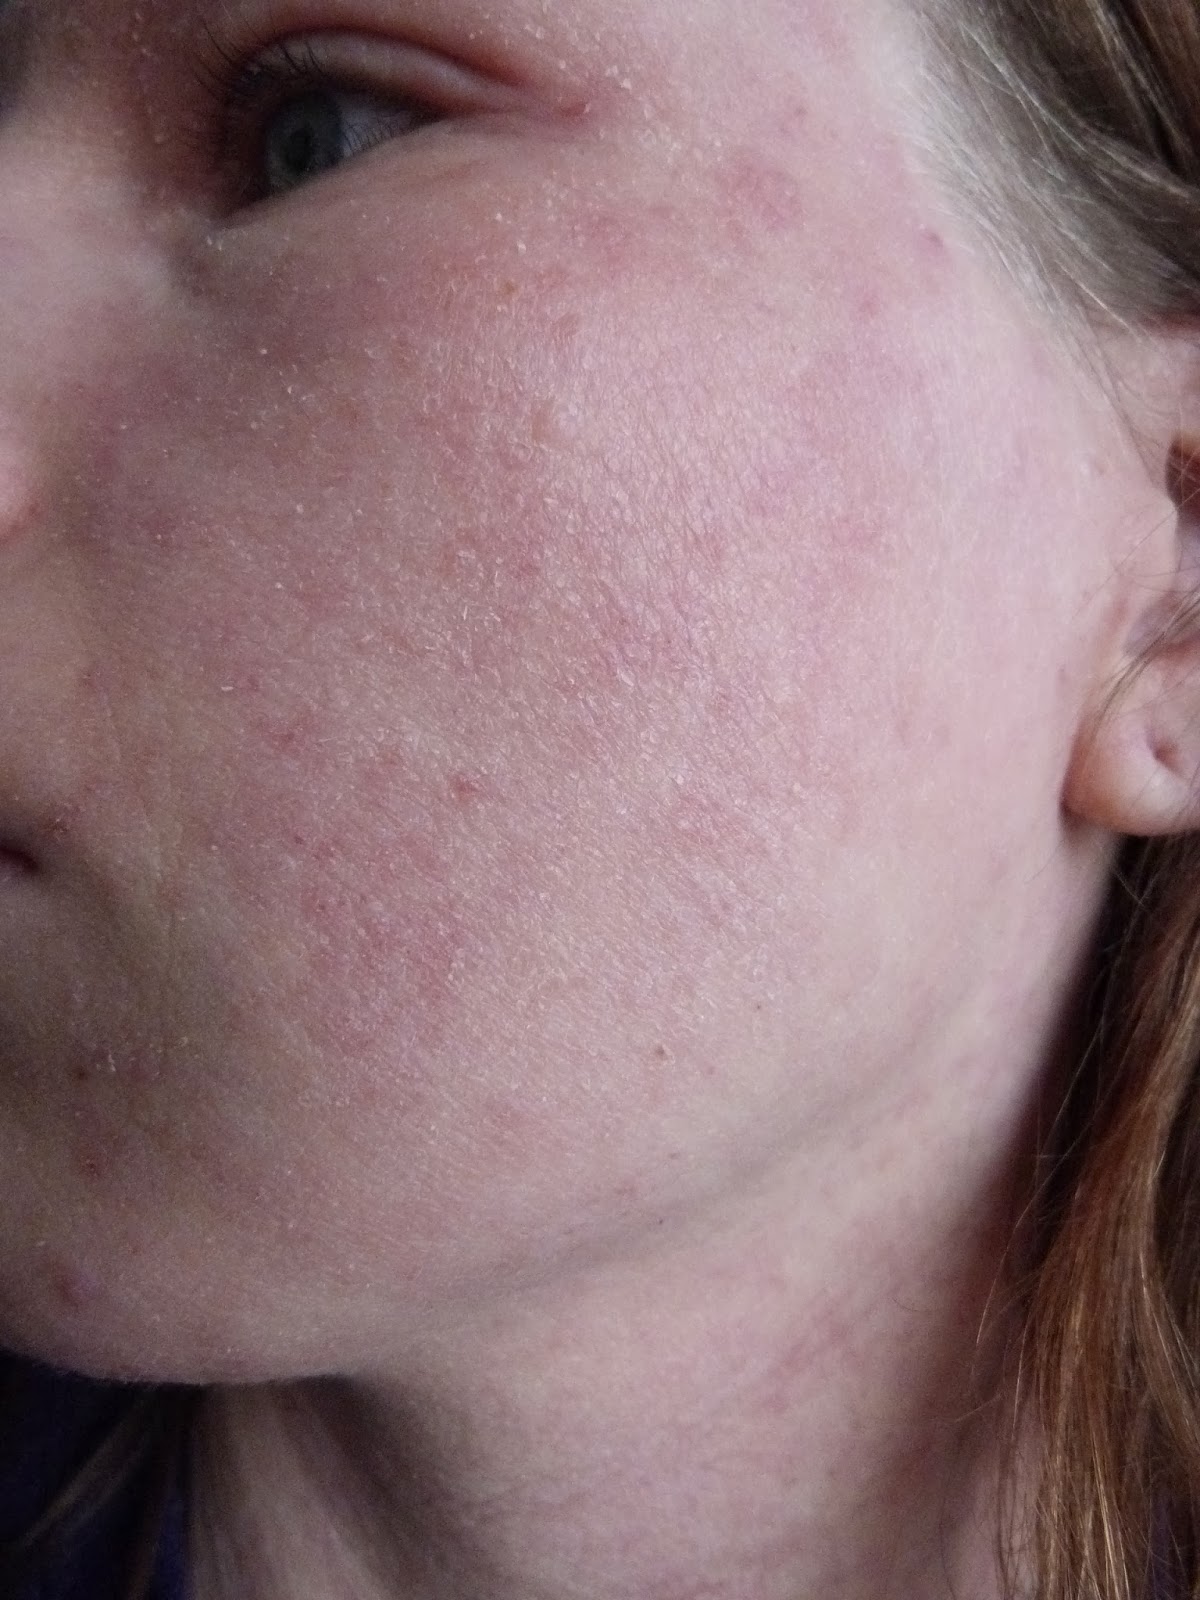 I Have Eczema: Photo of Eczema Skin 5 Months Topical Steroid Withdrawal